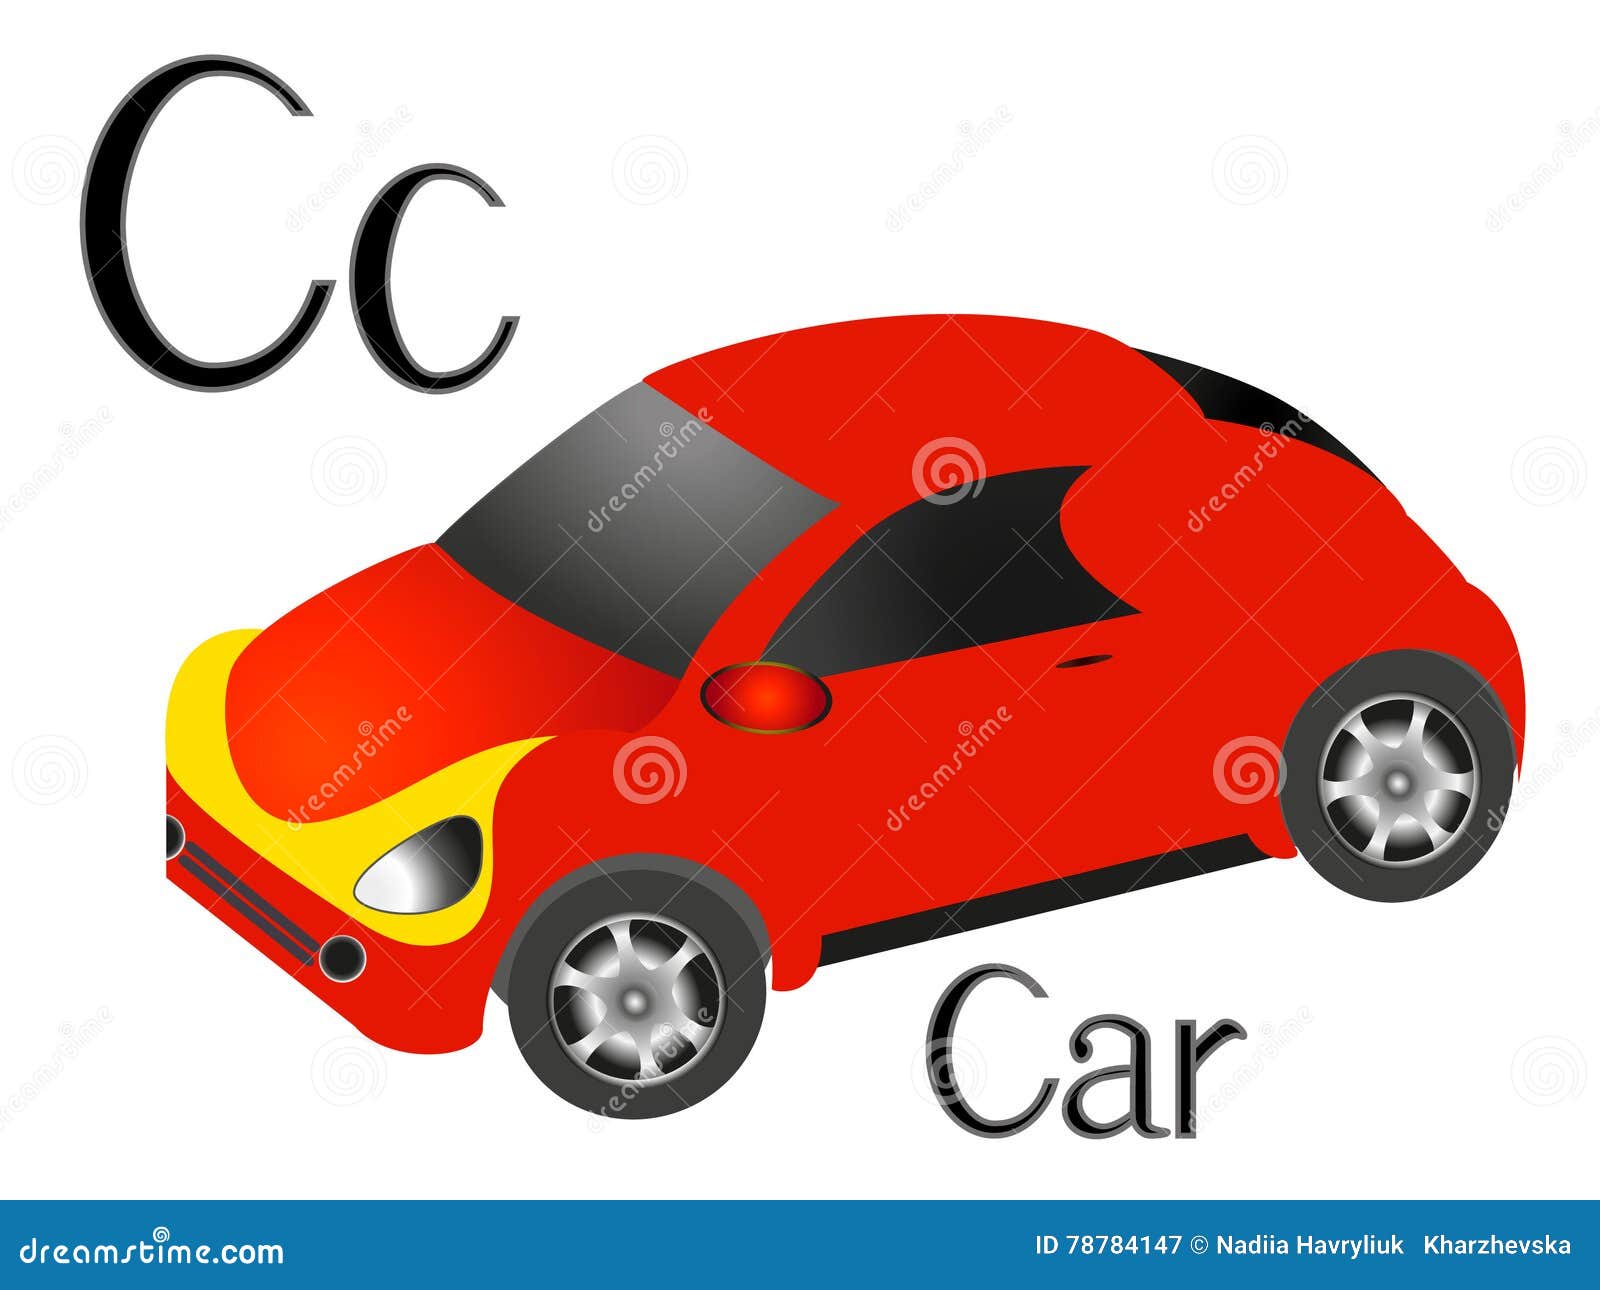 Illustration for Teaching Children the English Alphabet with Cartoon Car.  the Letter C. Stock Vector - Illustration of modern, colorful: 78784147